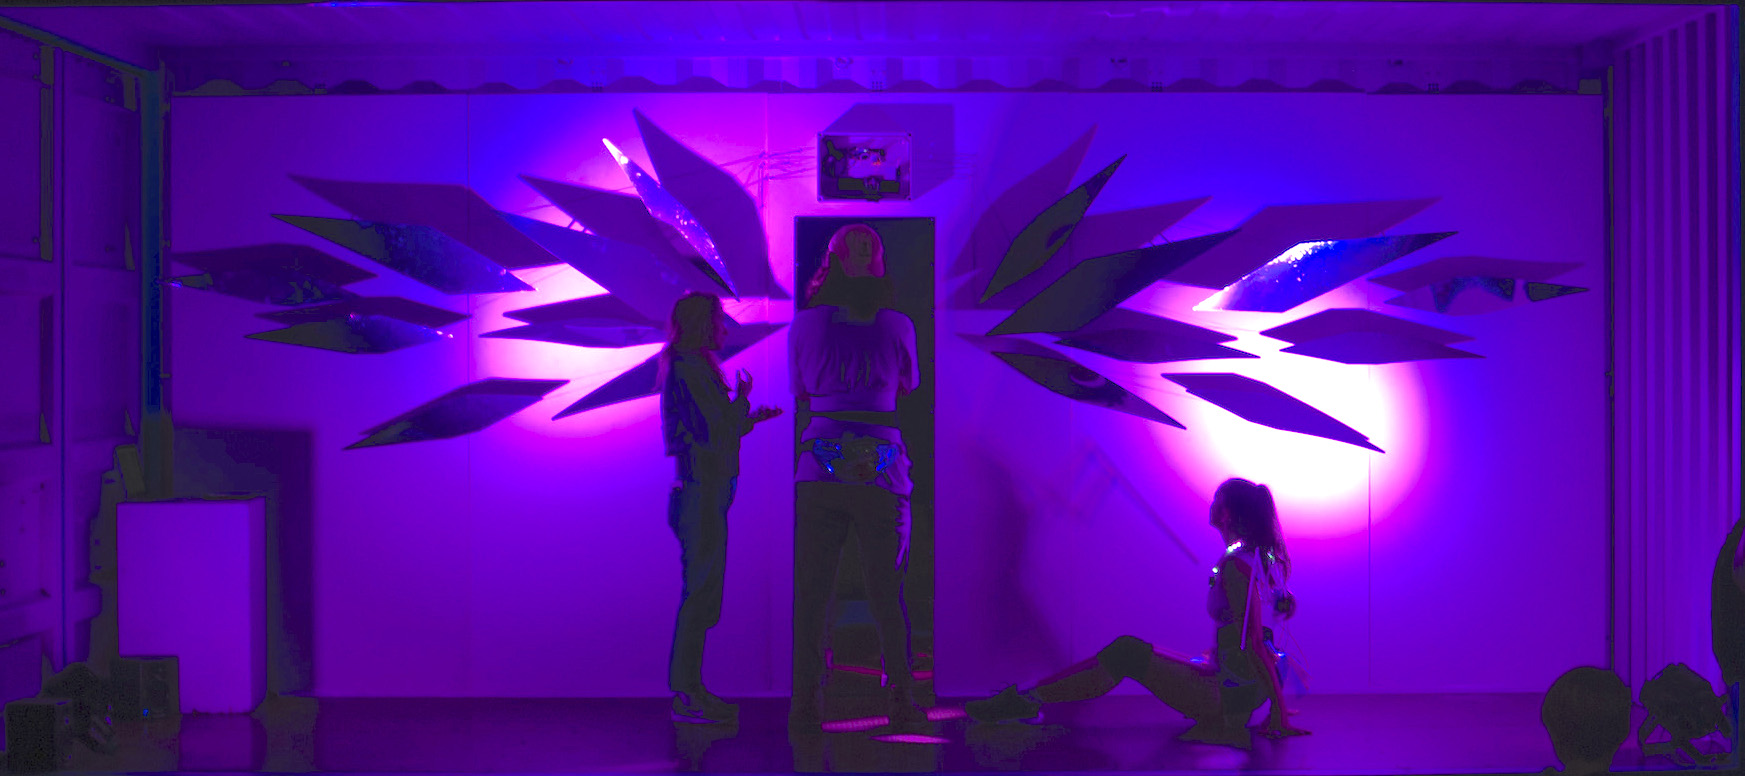 3 dancers standing on a purple lit stage with an installation of large, abstract wings made out of mirrors 